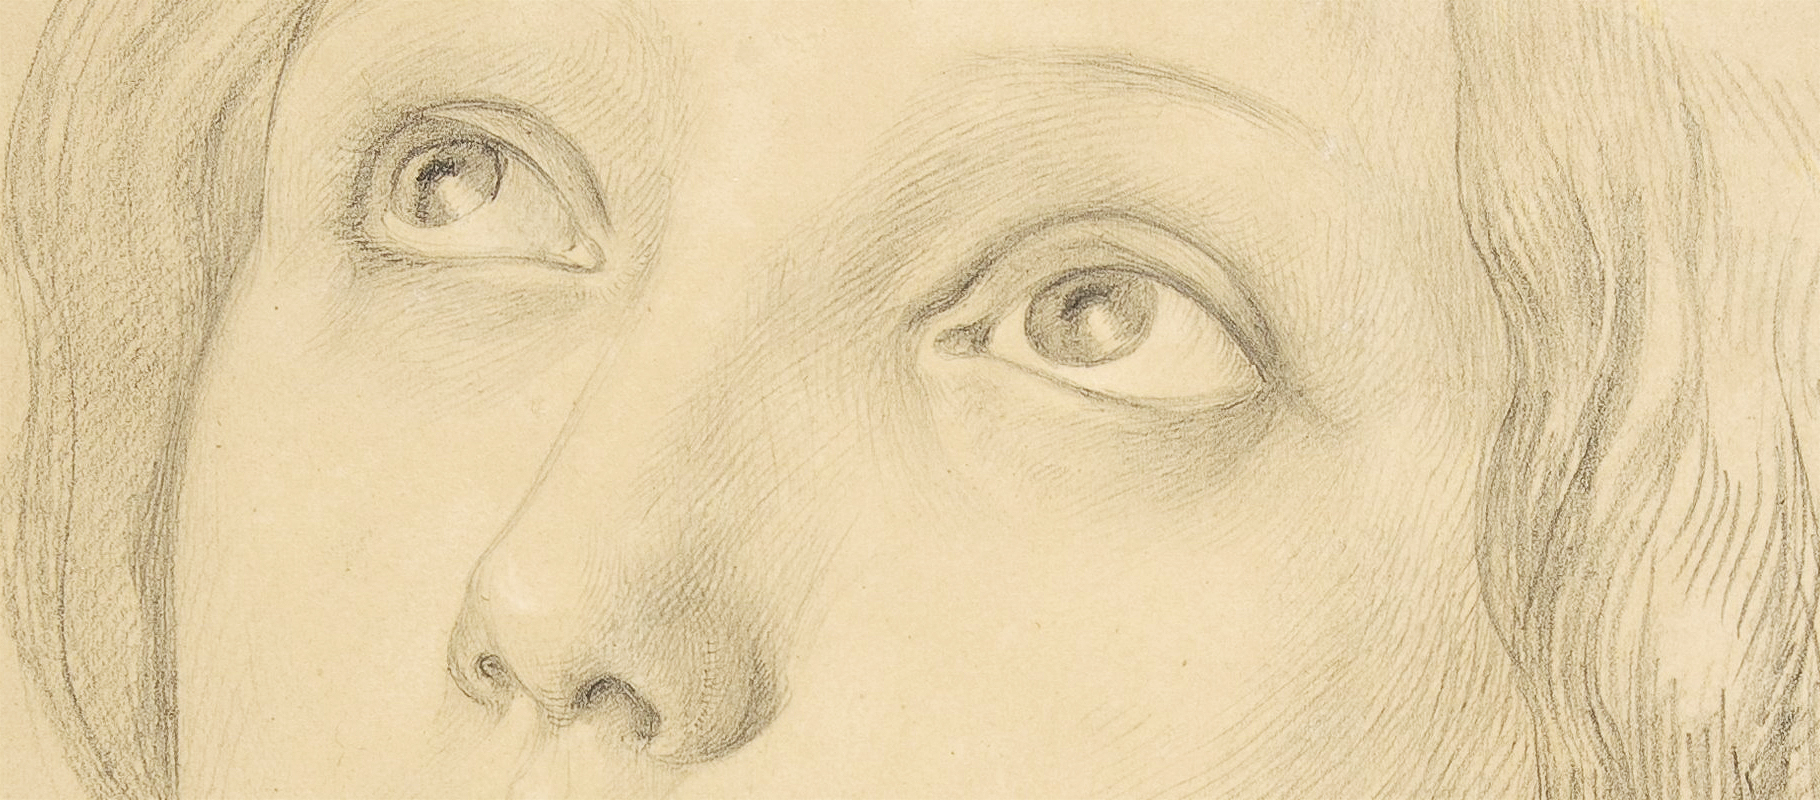 Glorious graphite: the history and restoration of pencil drawings